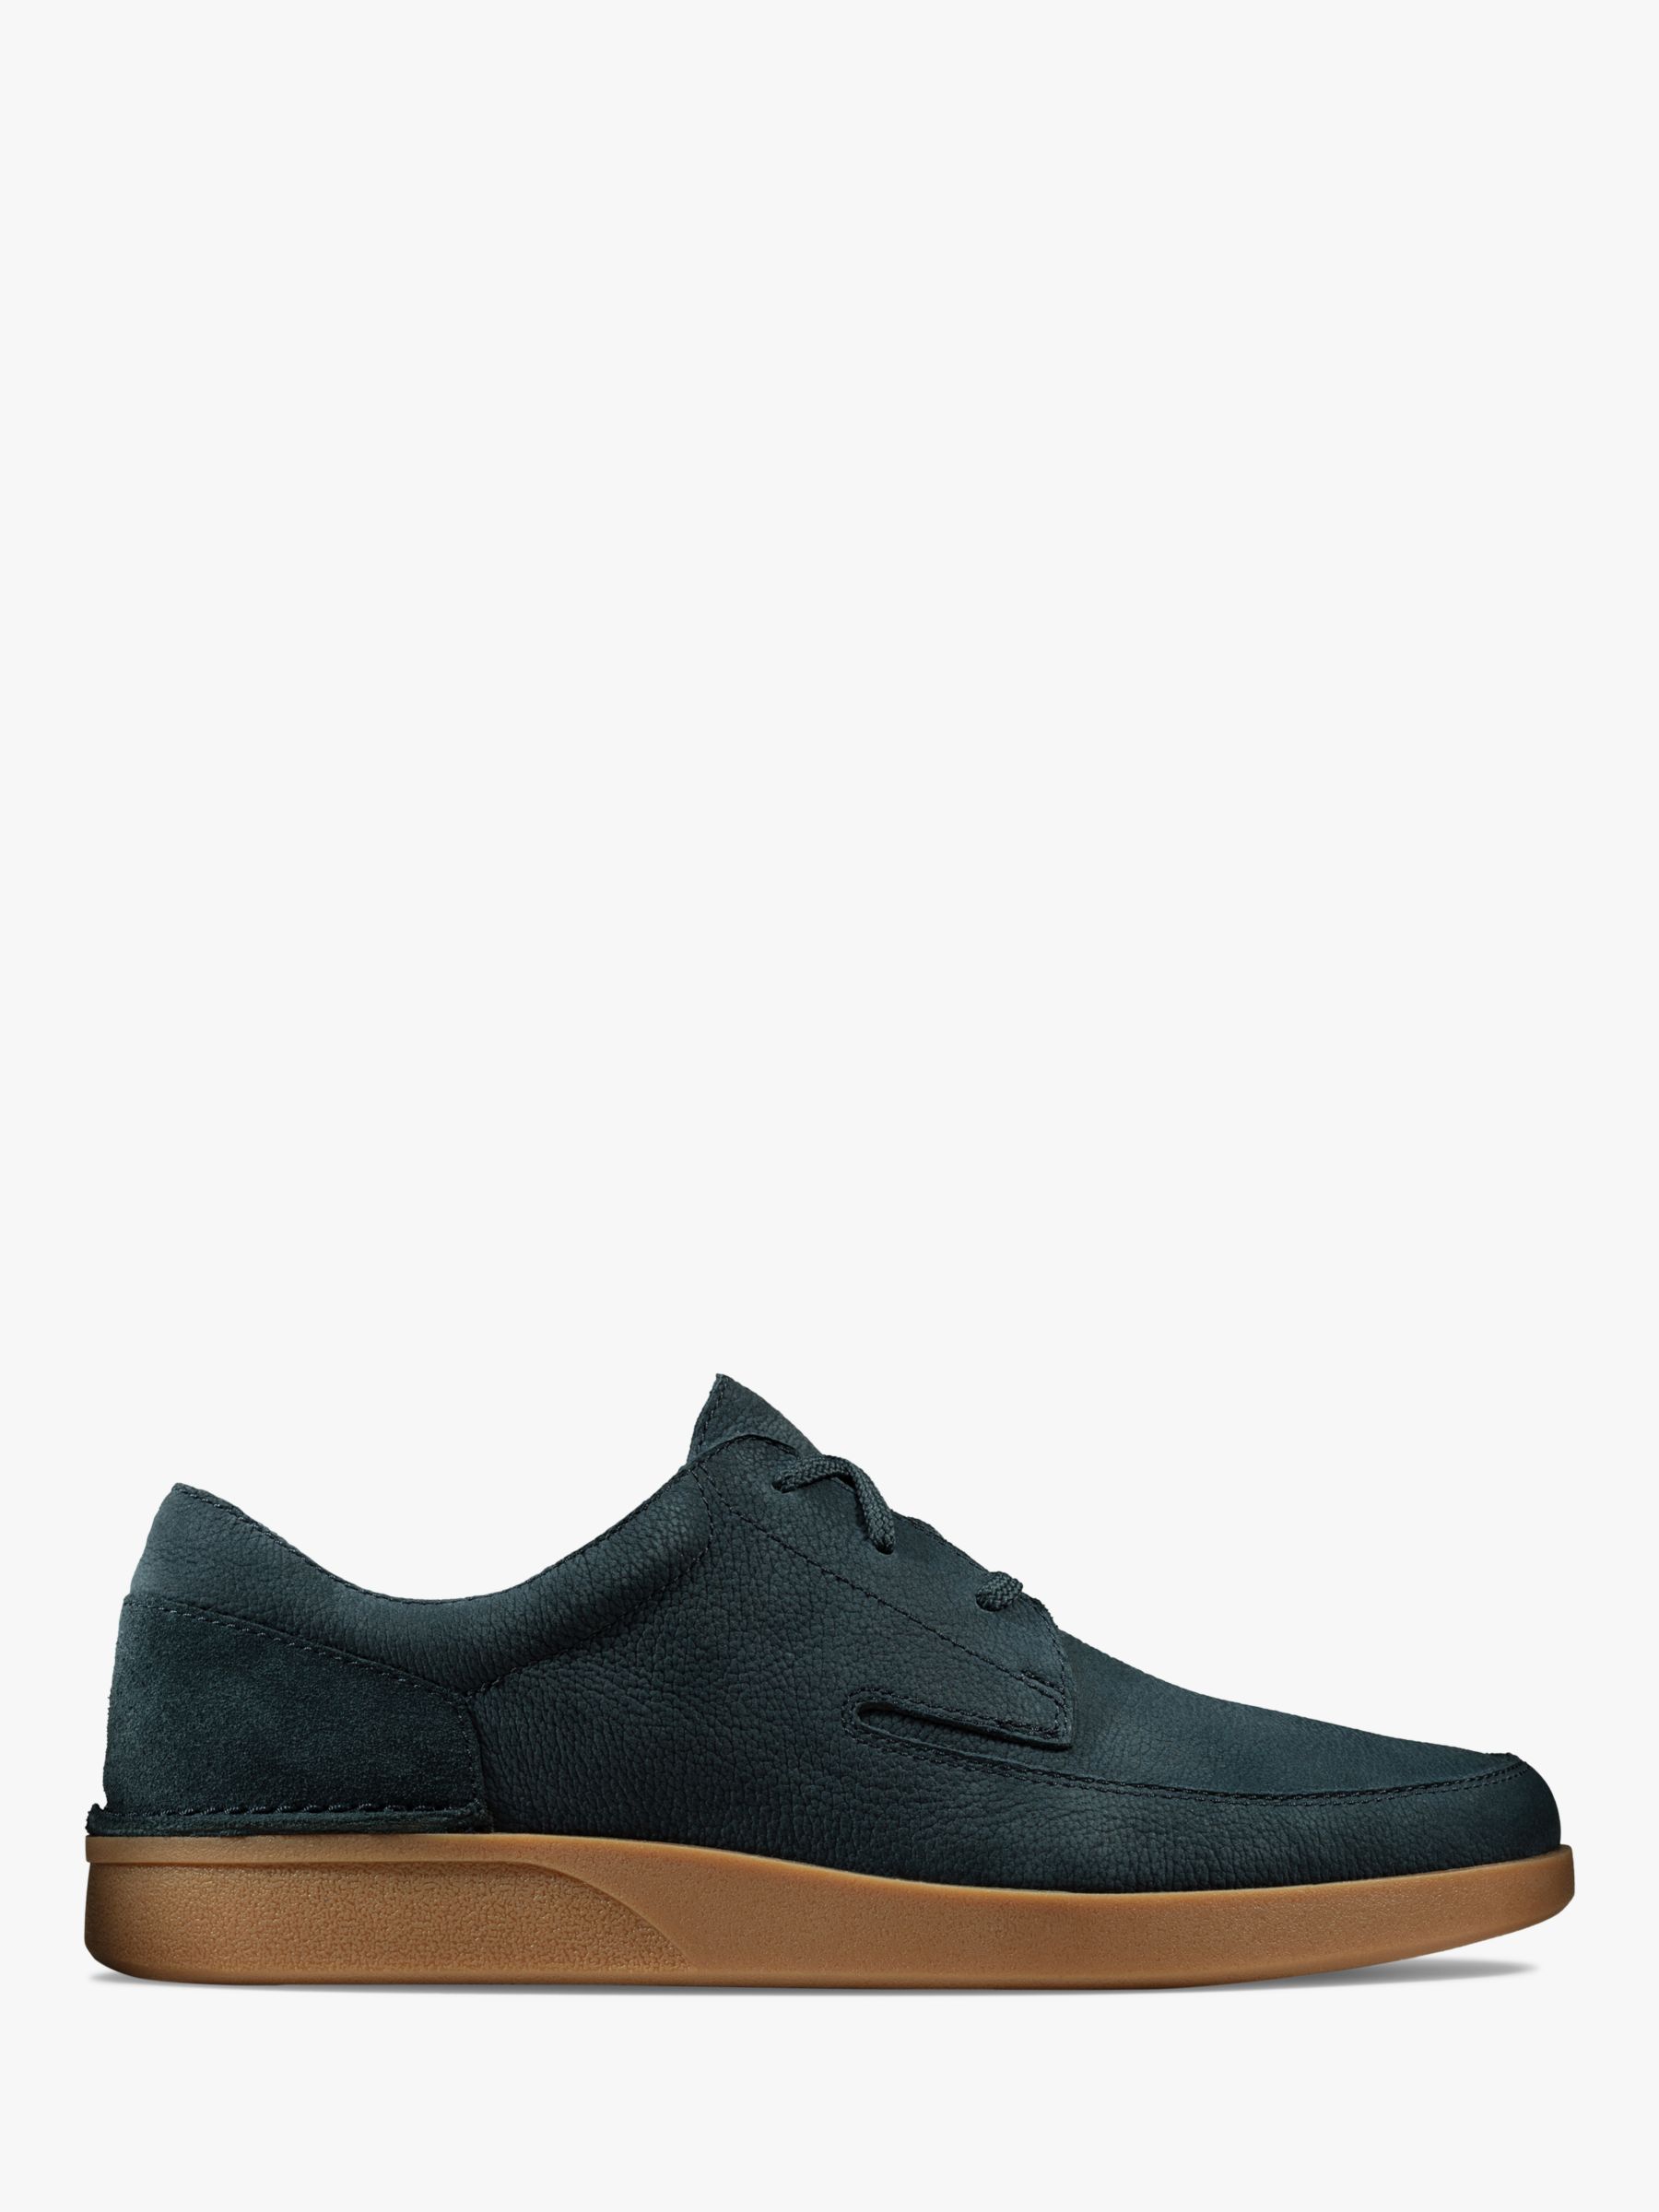 Clarks Oakland Craft Nubuck Shoes at 